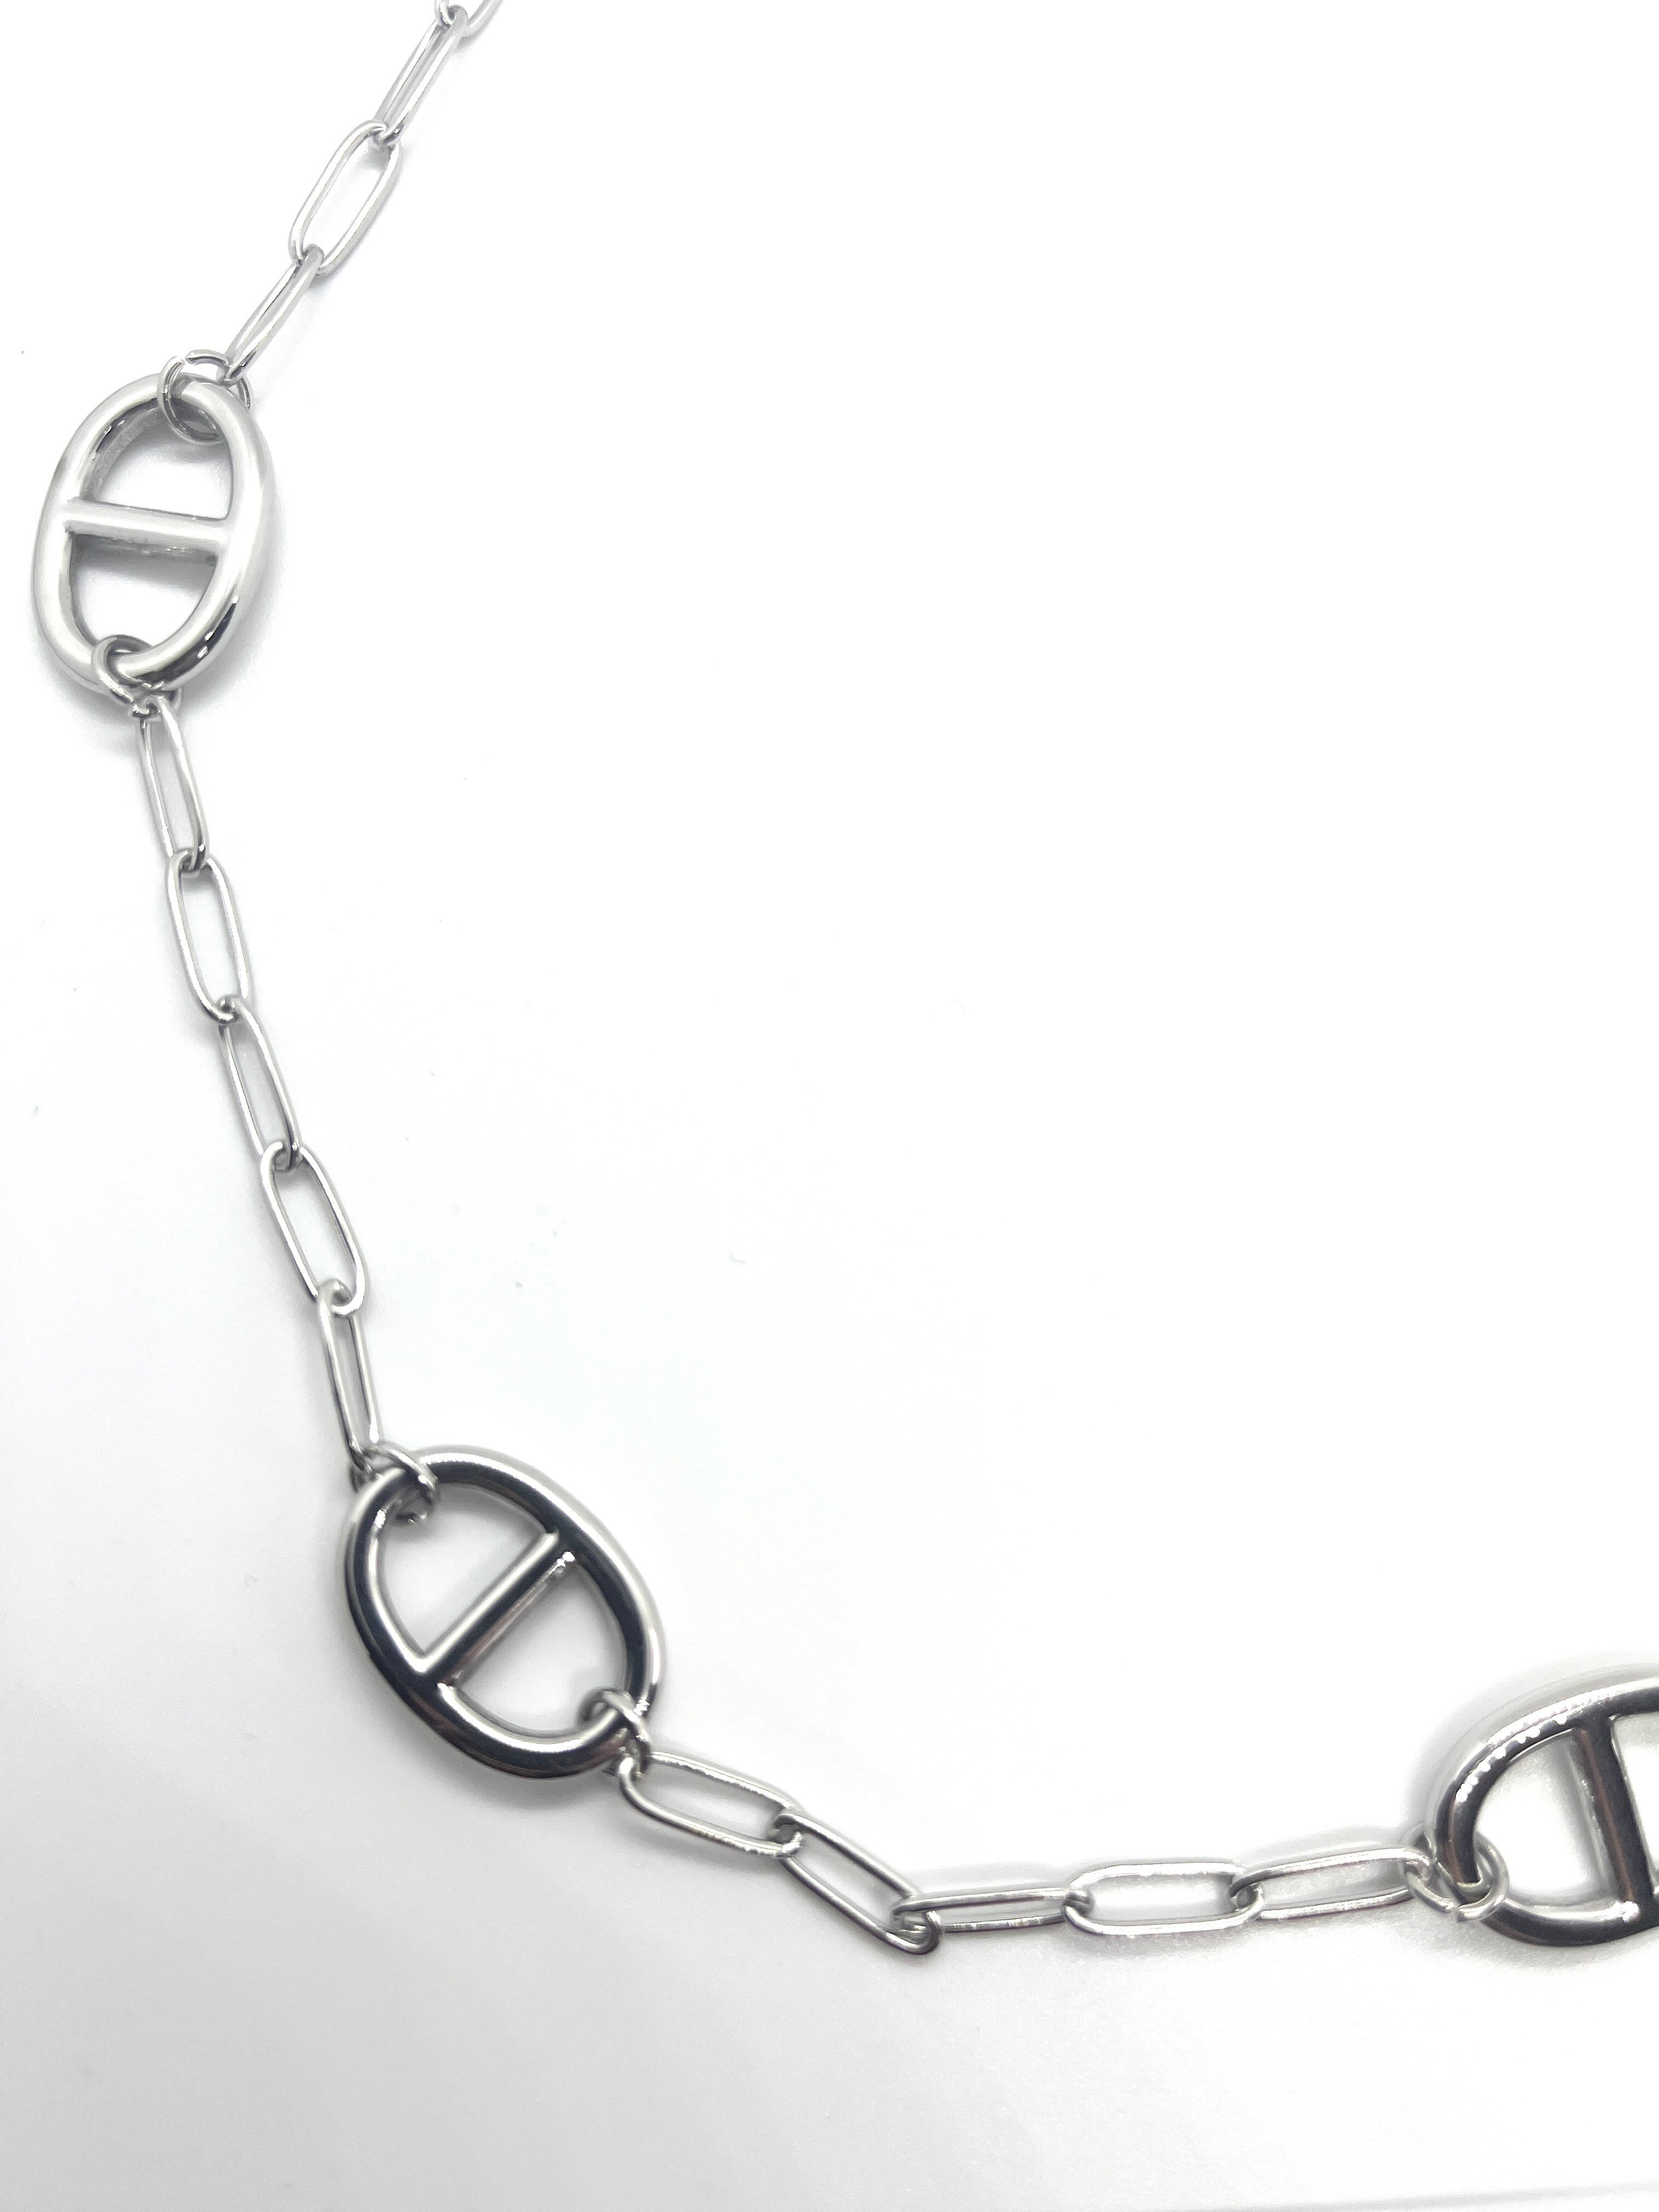 Collier maillons argent